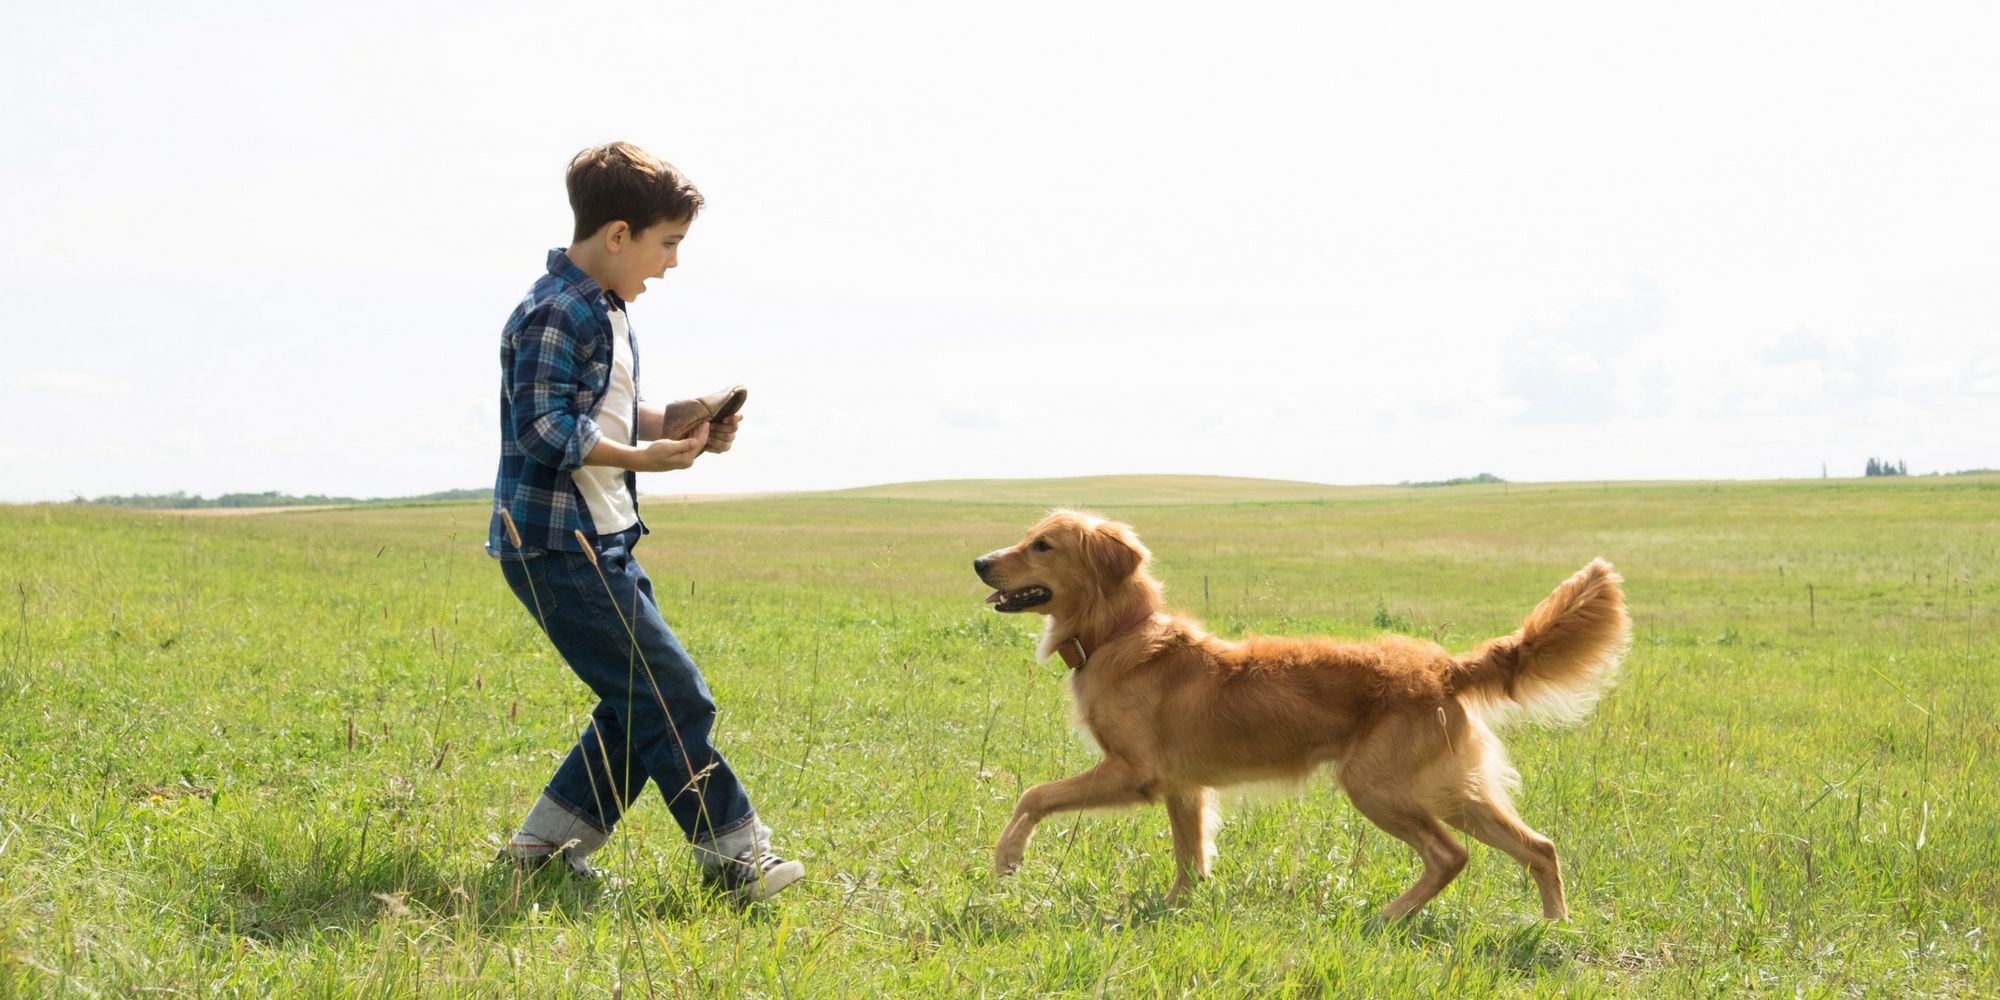 A Dog's Purpose - Young Ethan